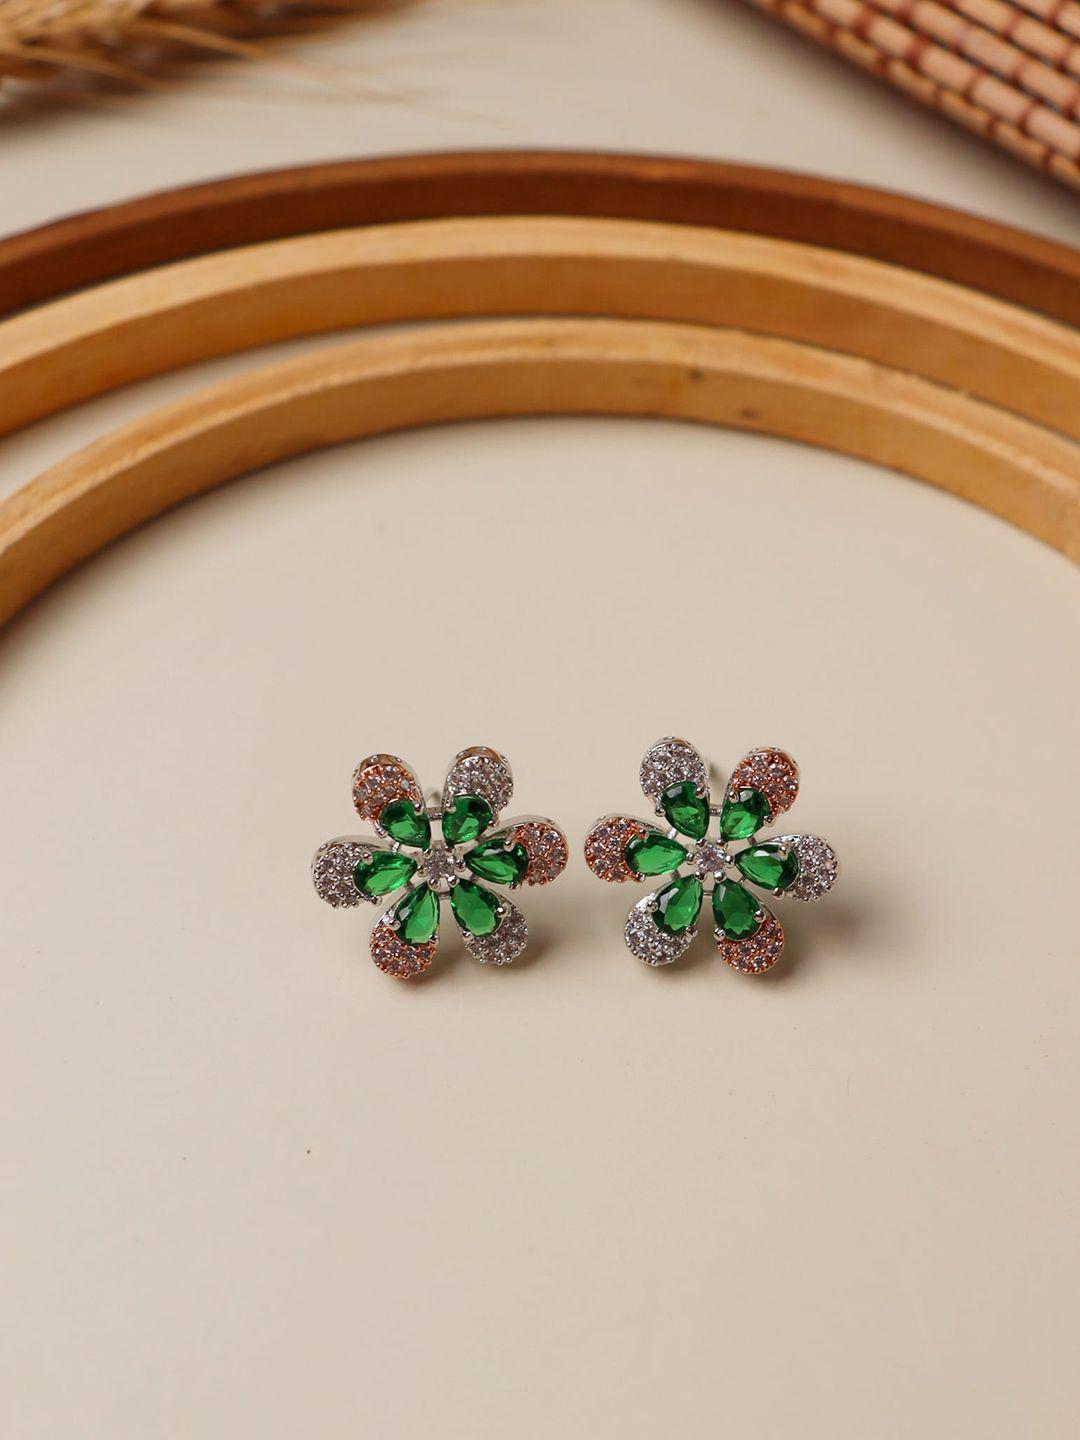 curio cottage green & rose gold floral studs earrings